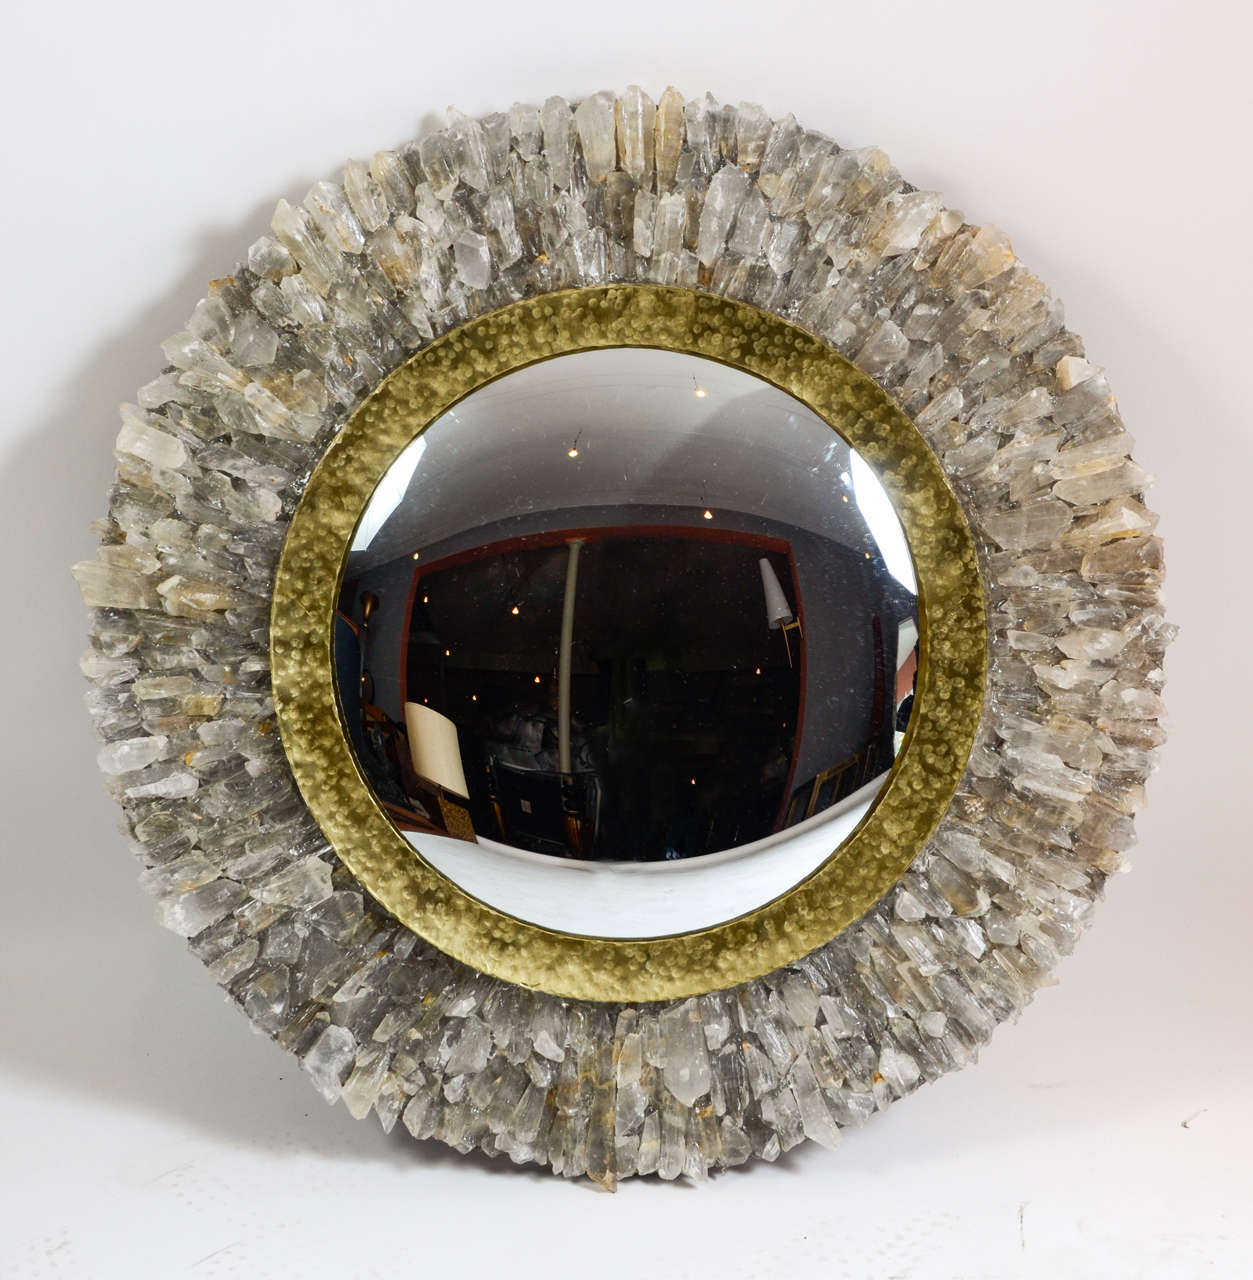 Incredible pair of convex mirror in rock crystal pieces
the mirror itself is highlighted with a round piece of hammered gilt metal